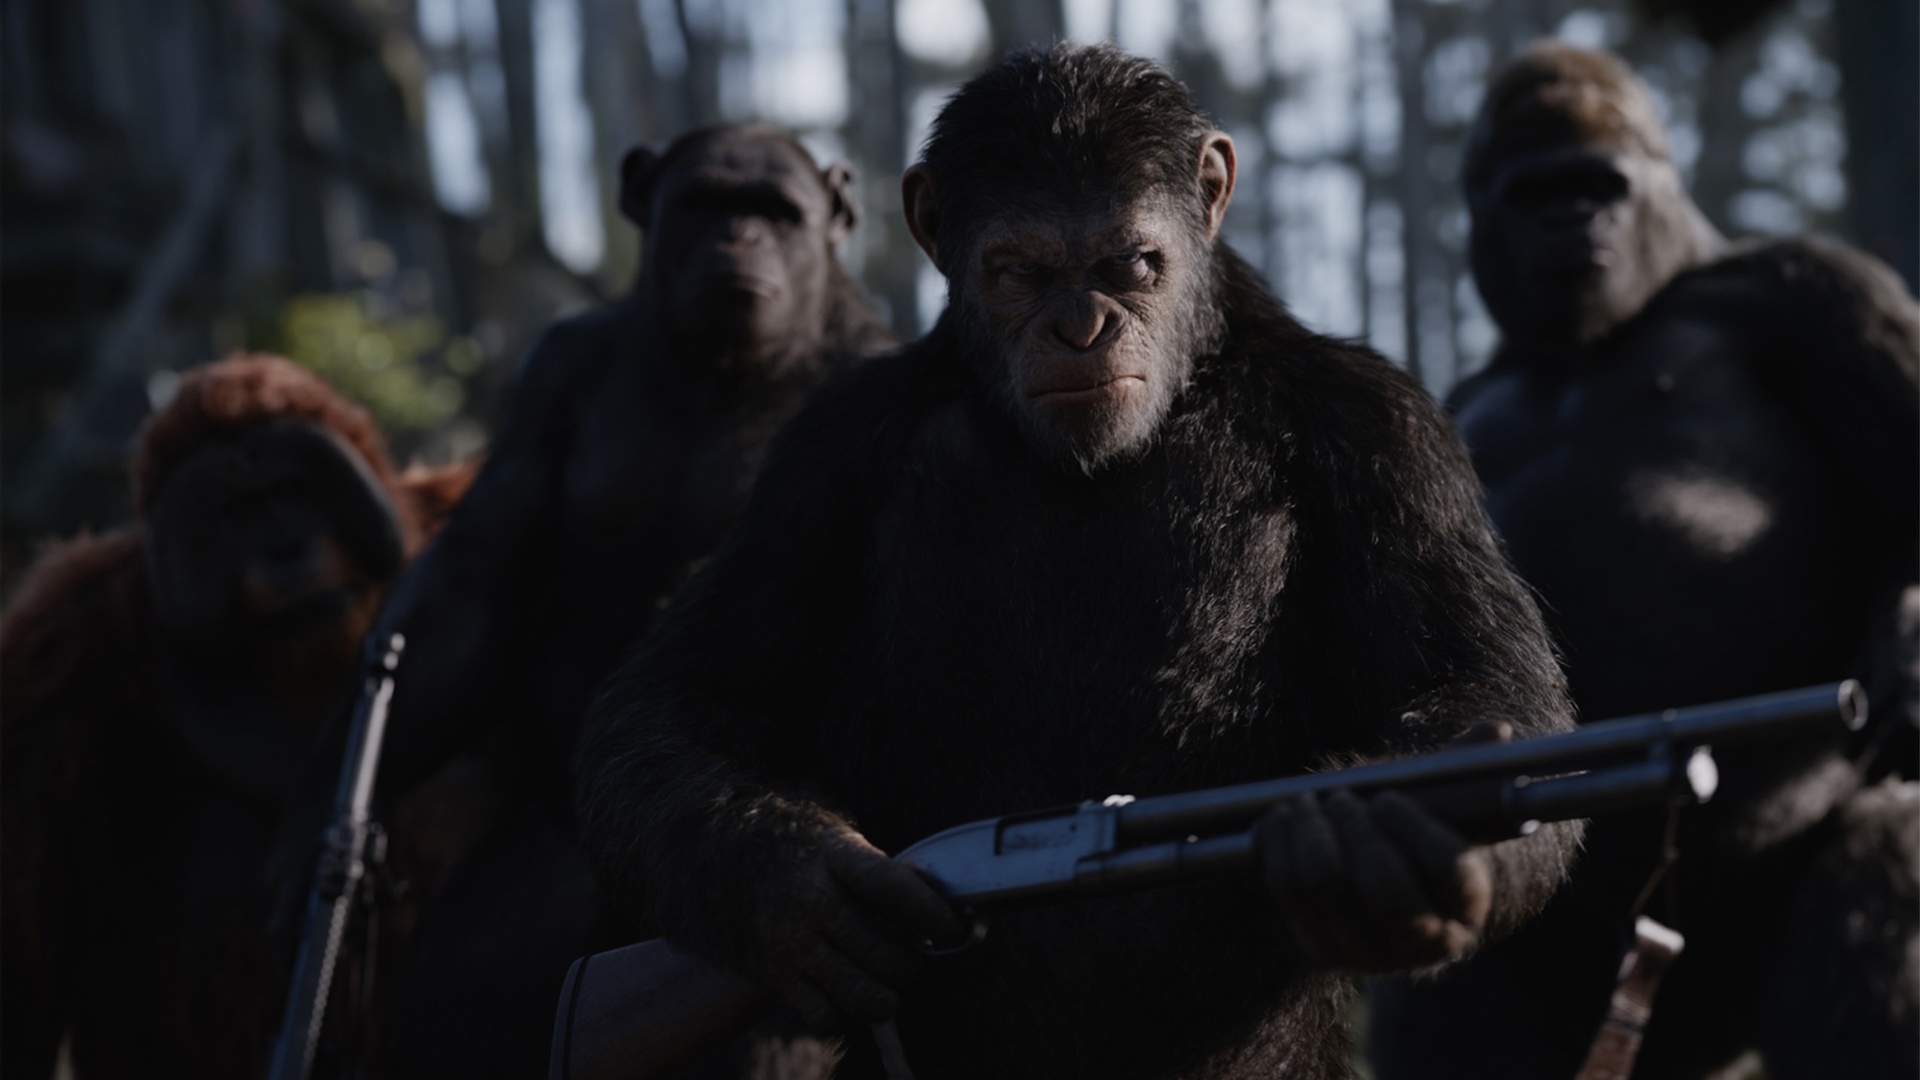 caesar (planet of the apes), movie, war for the planet of the apes